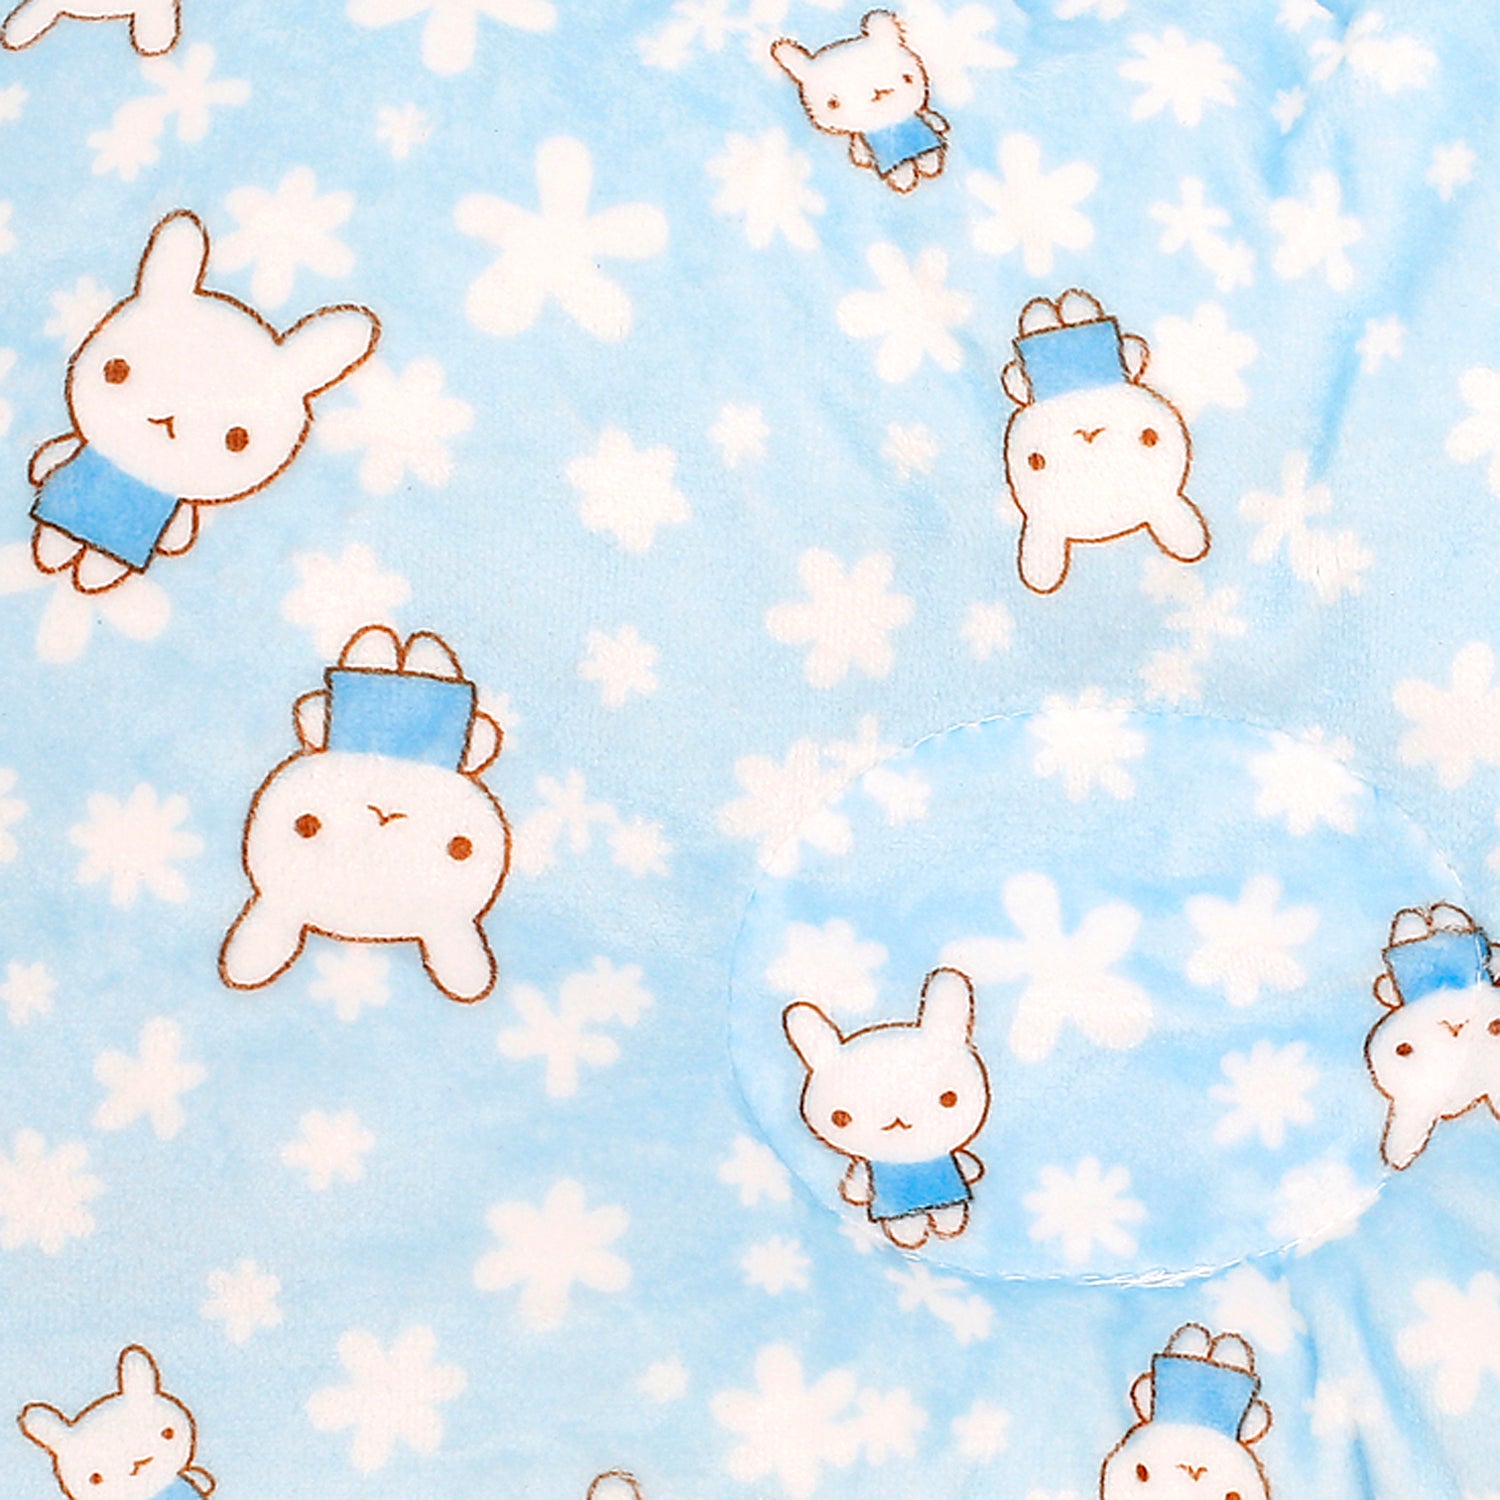 Bunny Blue Baby Pillow - Baby Moo